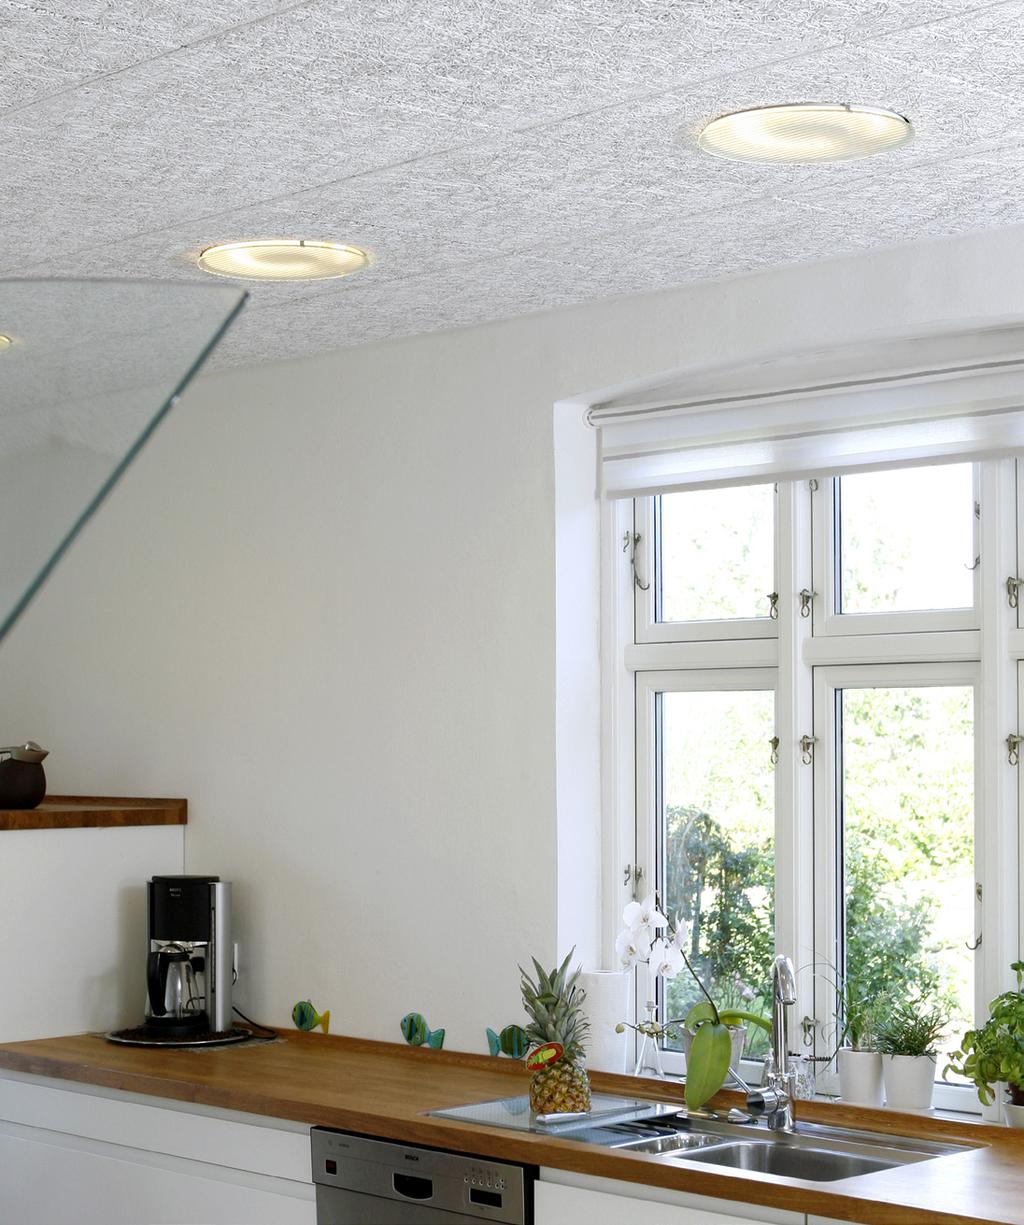 Troldtekt lighting Good lighting pure and simple Troldtekt lighting is a series with fitting armatures specially designed for installation in Troldtekt acoustic ceilings.